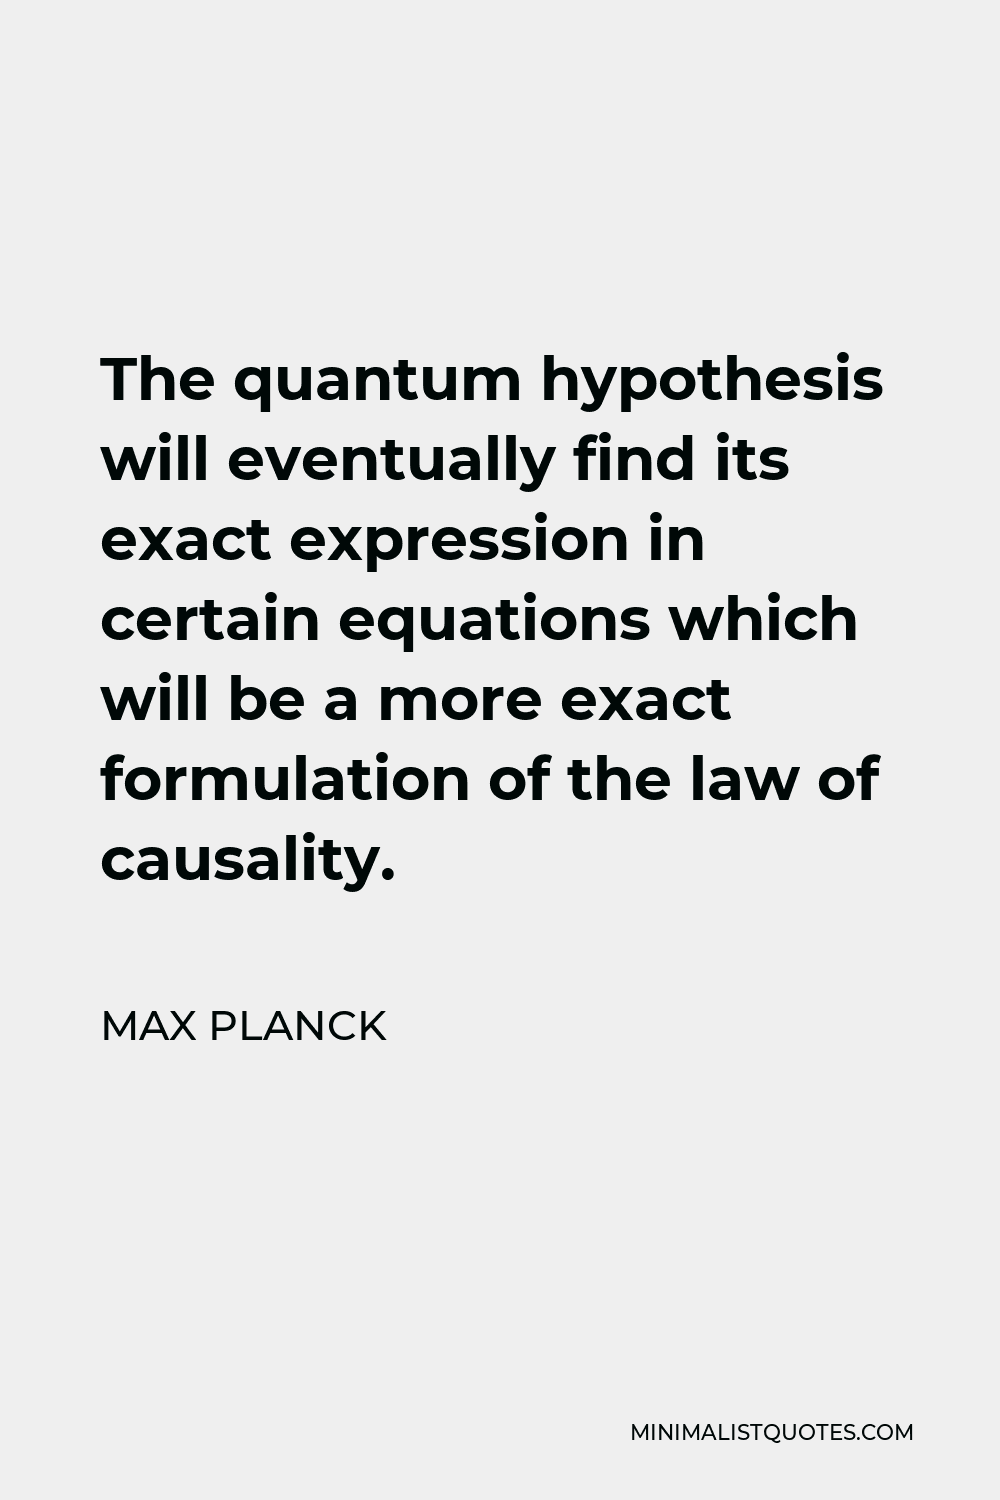 Max Planck Quote - The quantum hypothesis will eventually find its exact expression in certain equations which will be a more exact formulation of the law of causality.